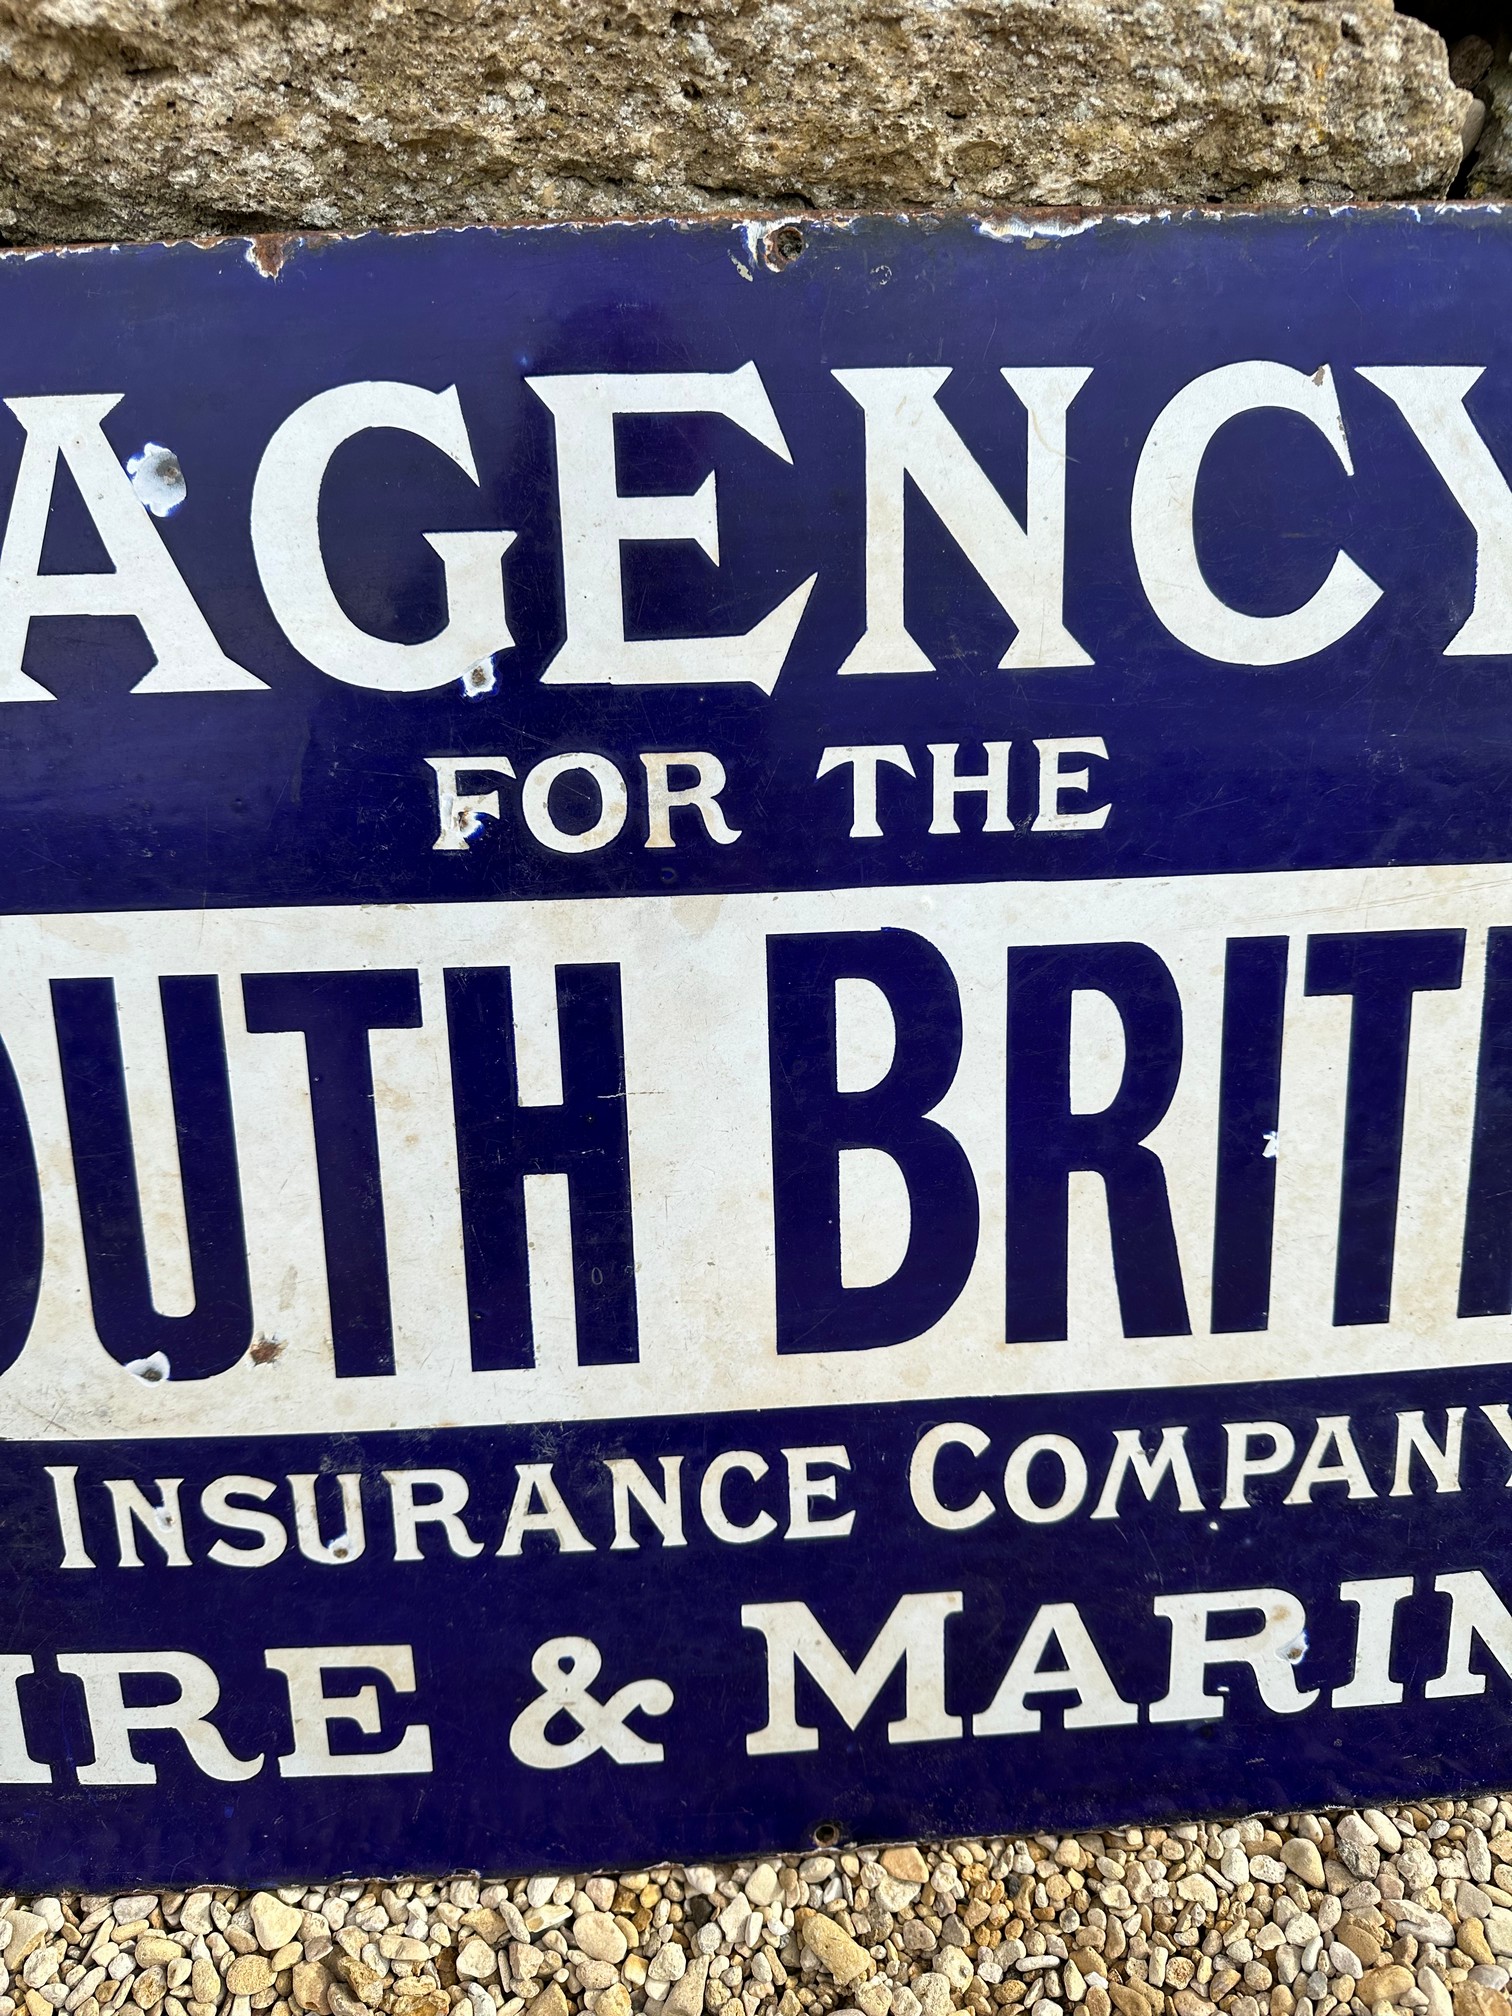 An Agency for the South British Insurance Company Fire & Marine, 30 x 18". - Image 5 of 5